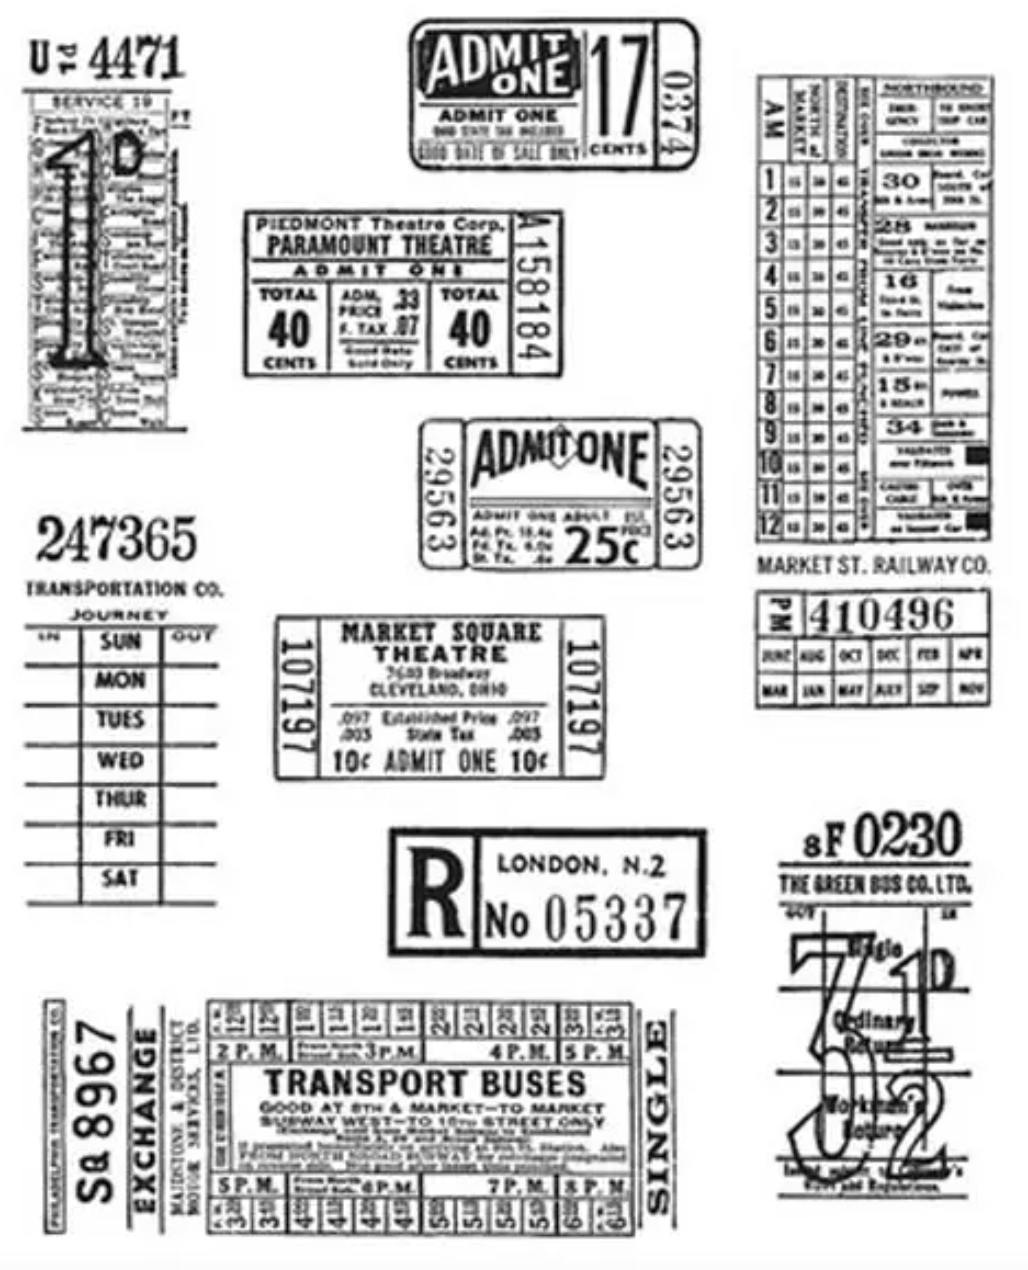 Tim Holtz - Stampers Anonymous - Cling Mount Rubber Stamp Ticket Booth - Messy Papercrafts